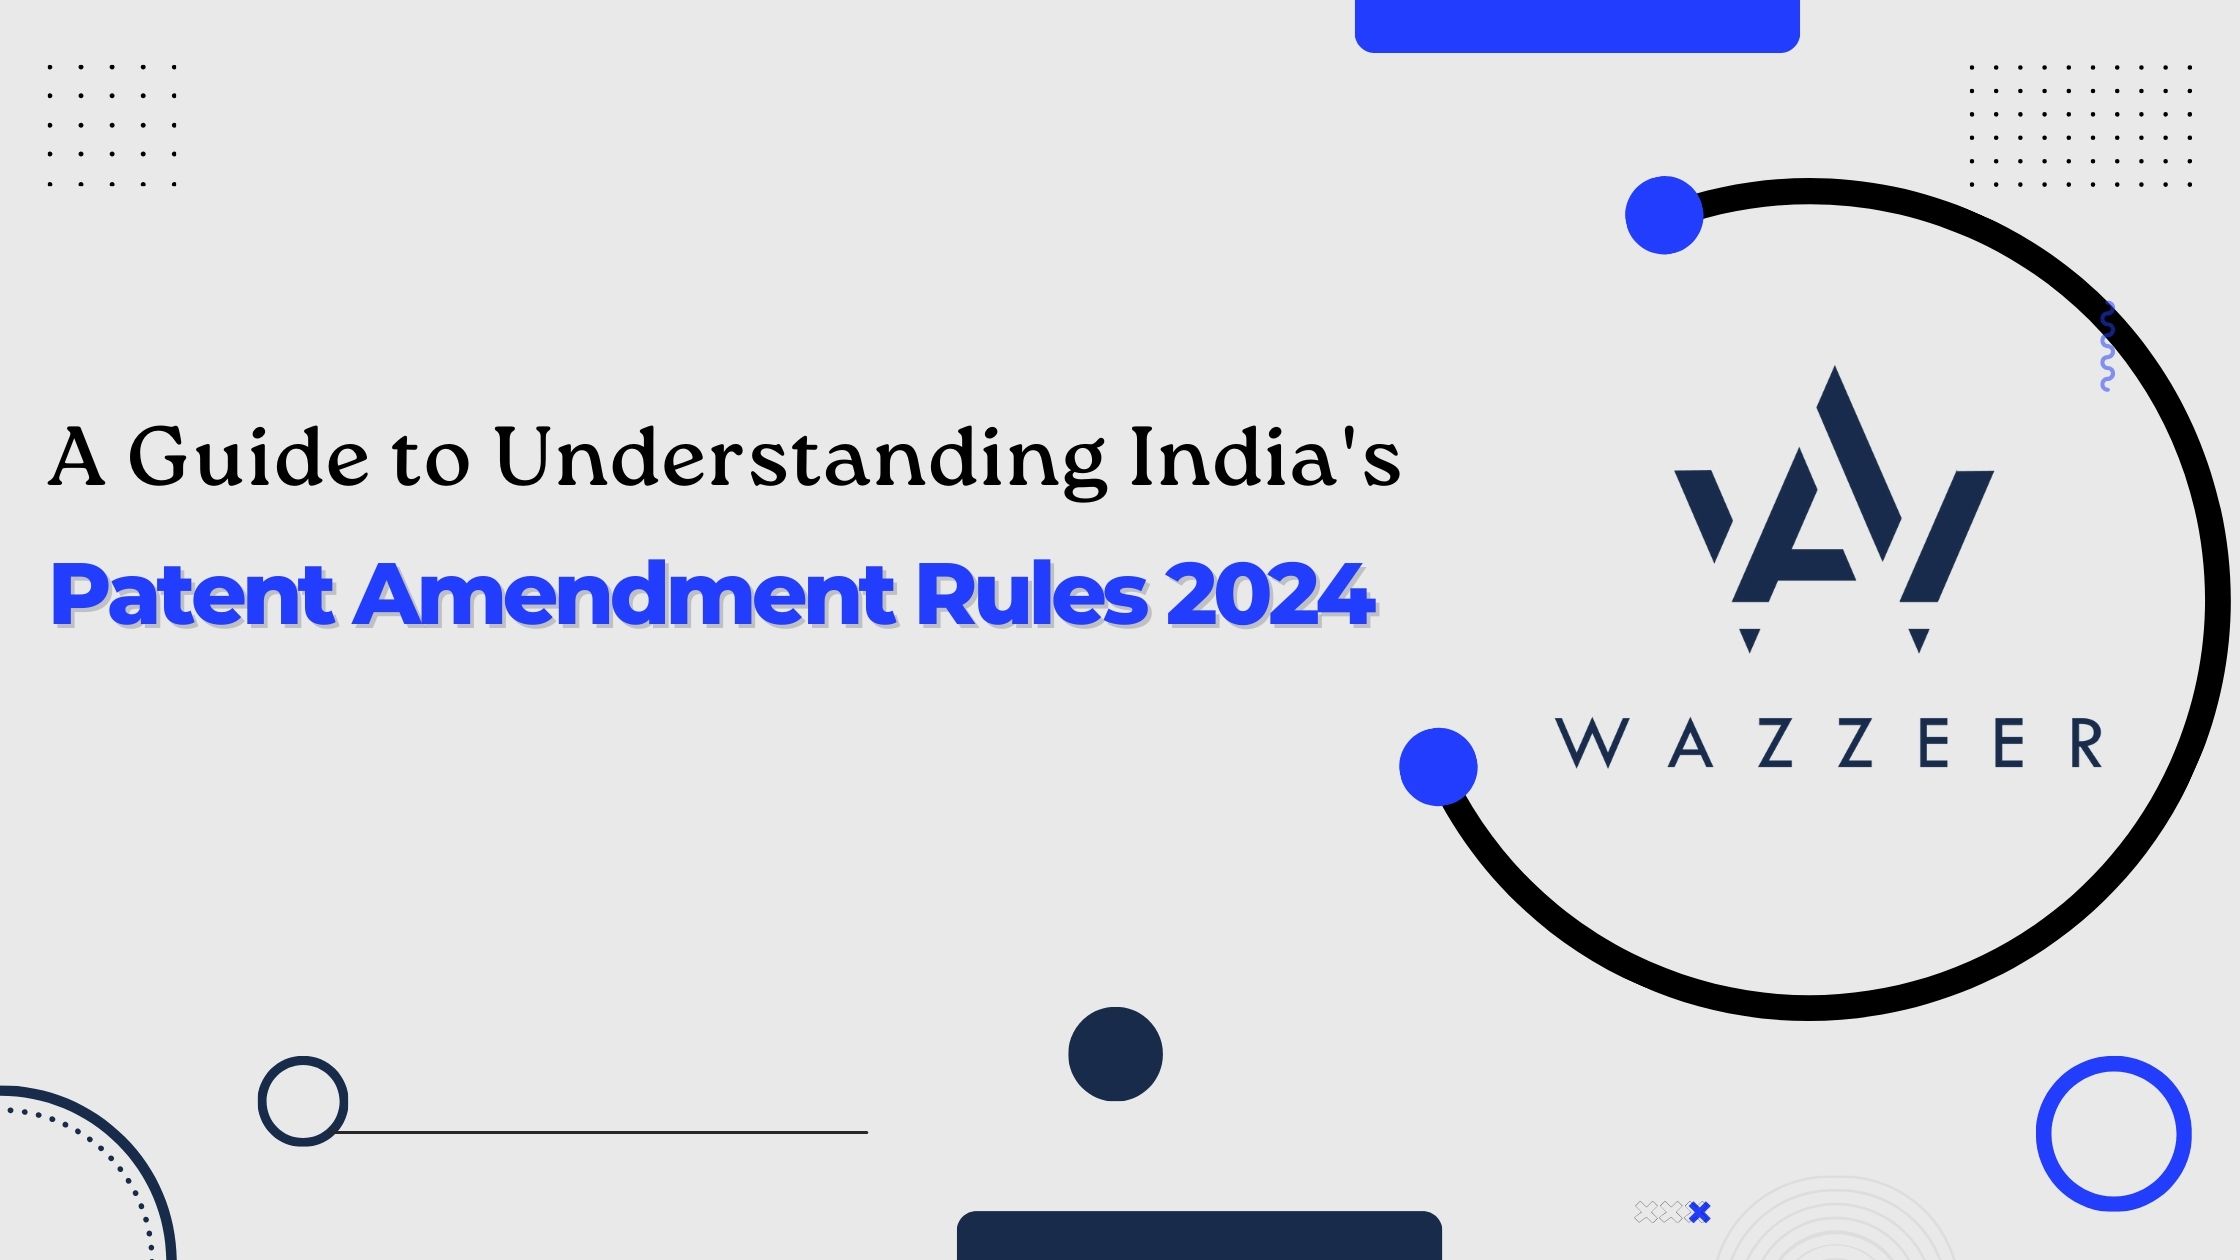 A Guide to Understanding India’s Patent Amendment Rules 2024